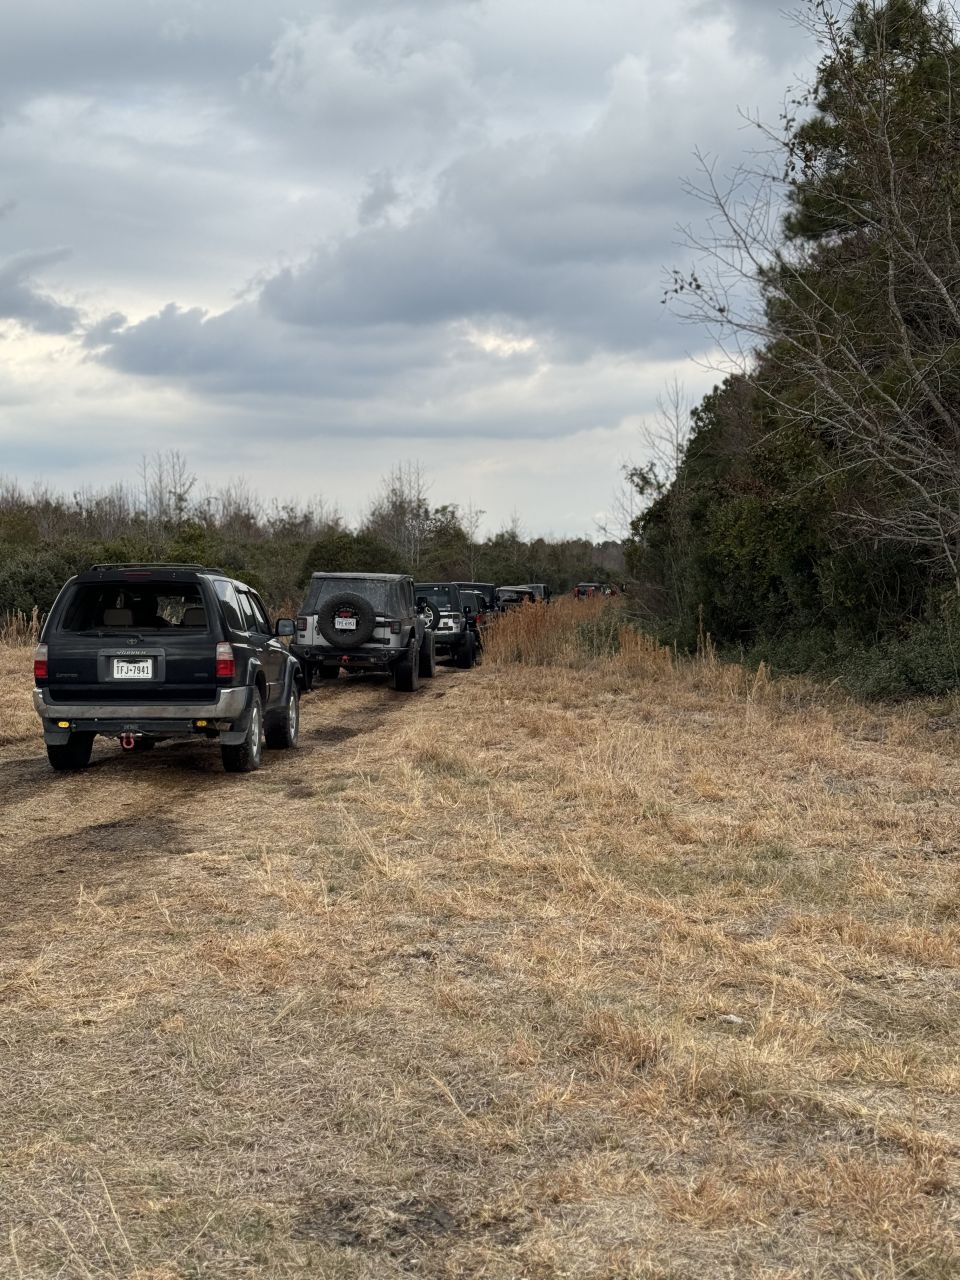 If you are looking for places to go wheeling in SEVA or OBX area then checkout W2WParks.com for our local wheeling events!